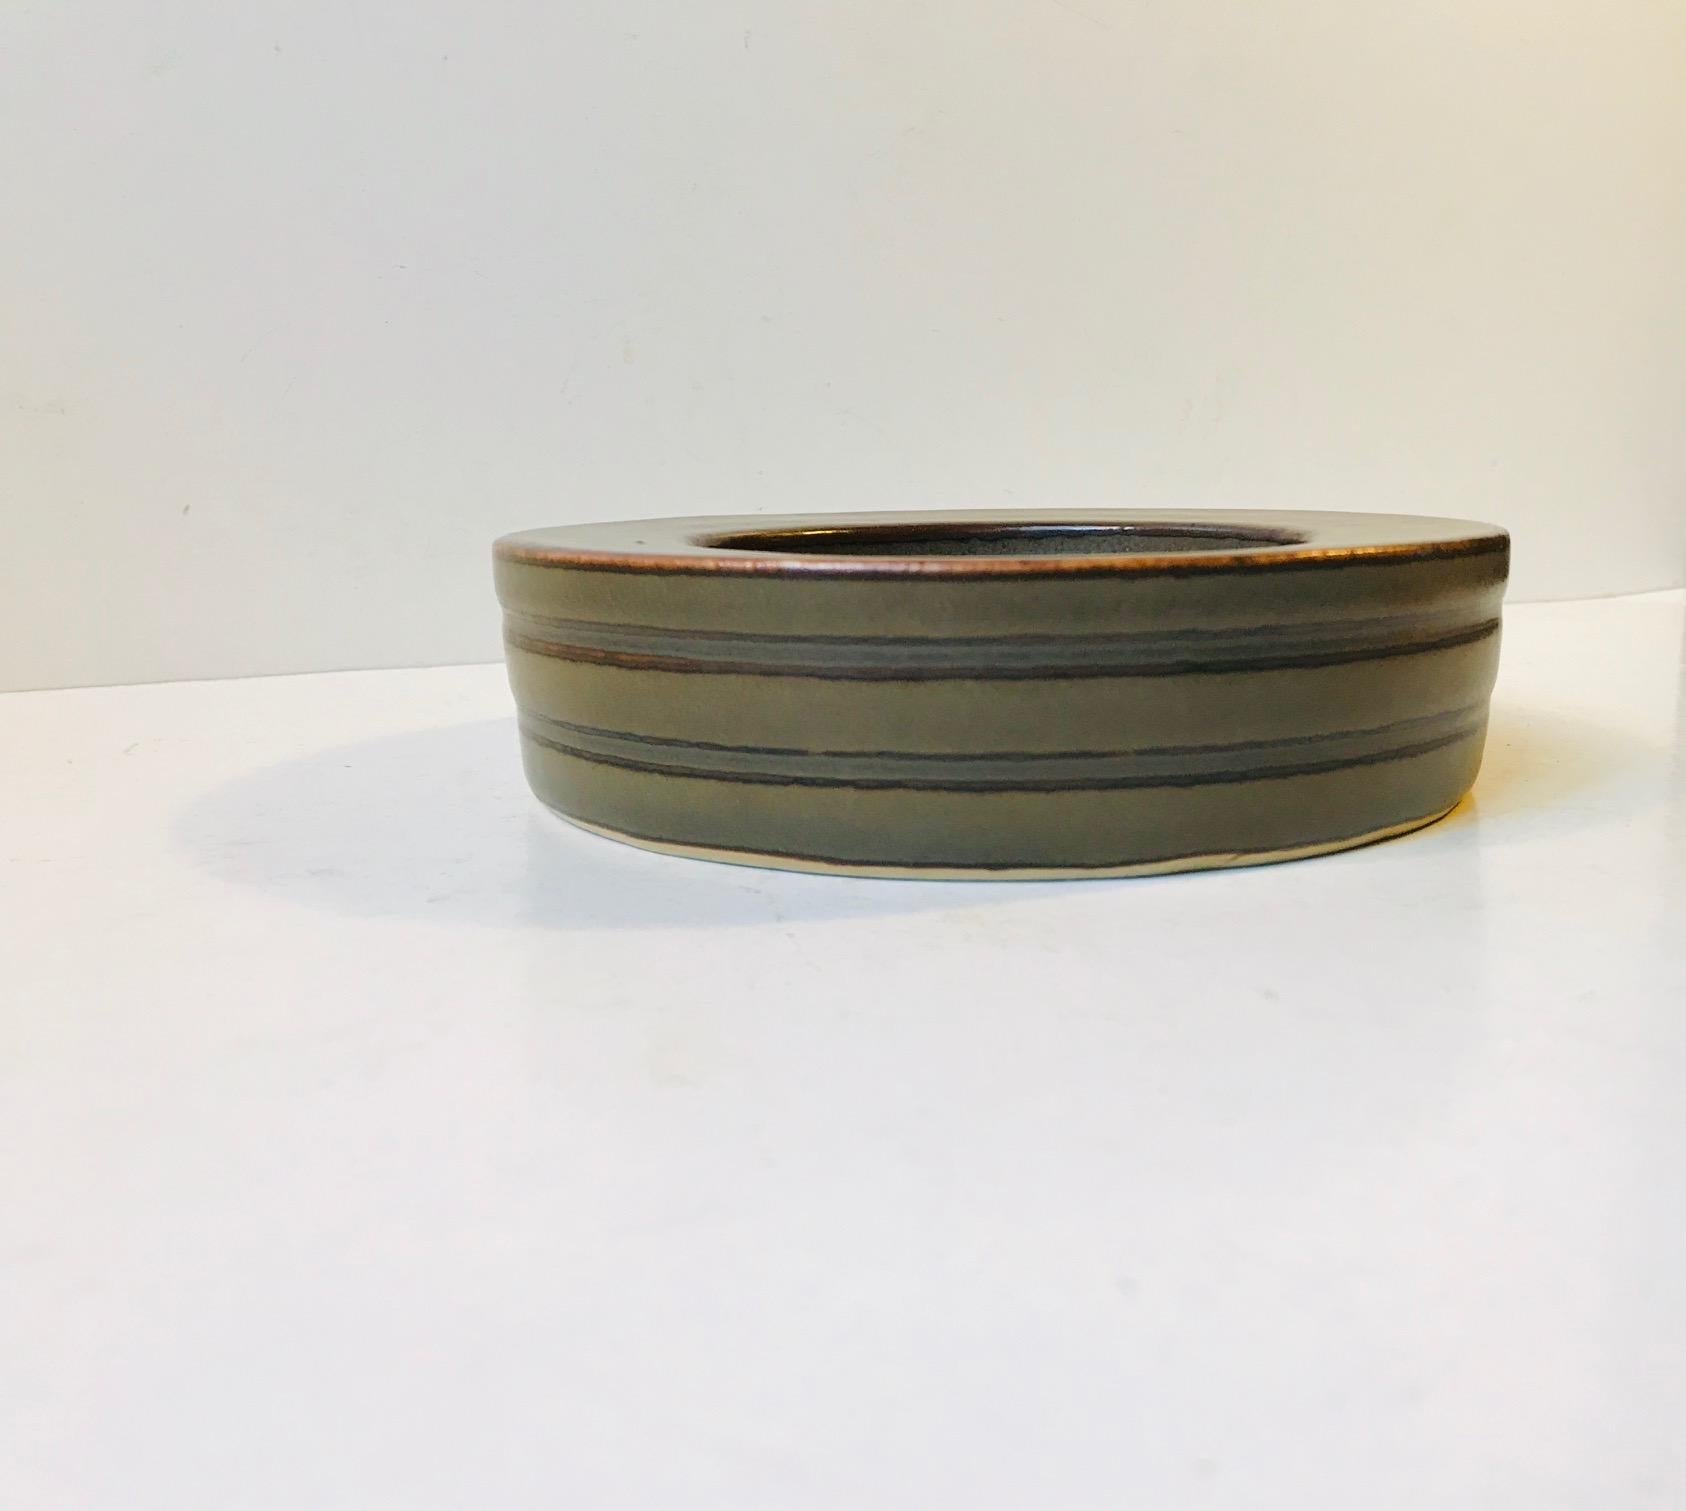 This circular heavily glazed earthy textured stoneware bowl is designed by the Danish ceramist Valdemar Petersen and manufactured by B&G. It is signed by the artist and maker at the bottom. The glazing techniques applied are reminiscent of Nils